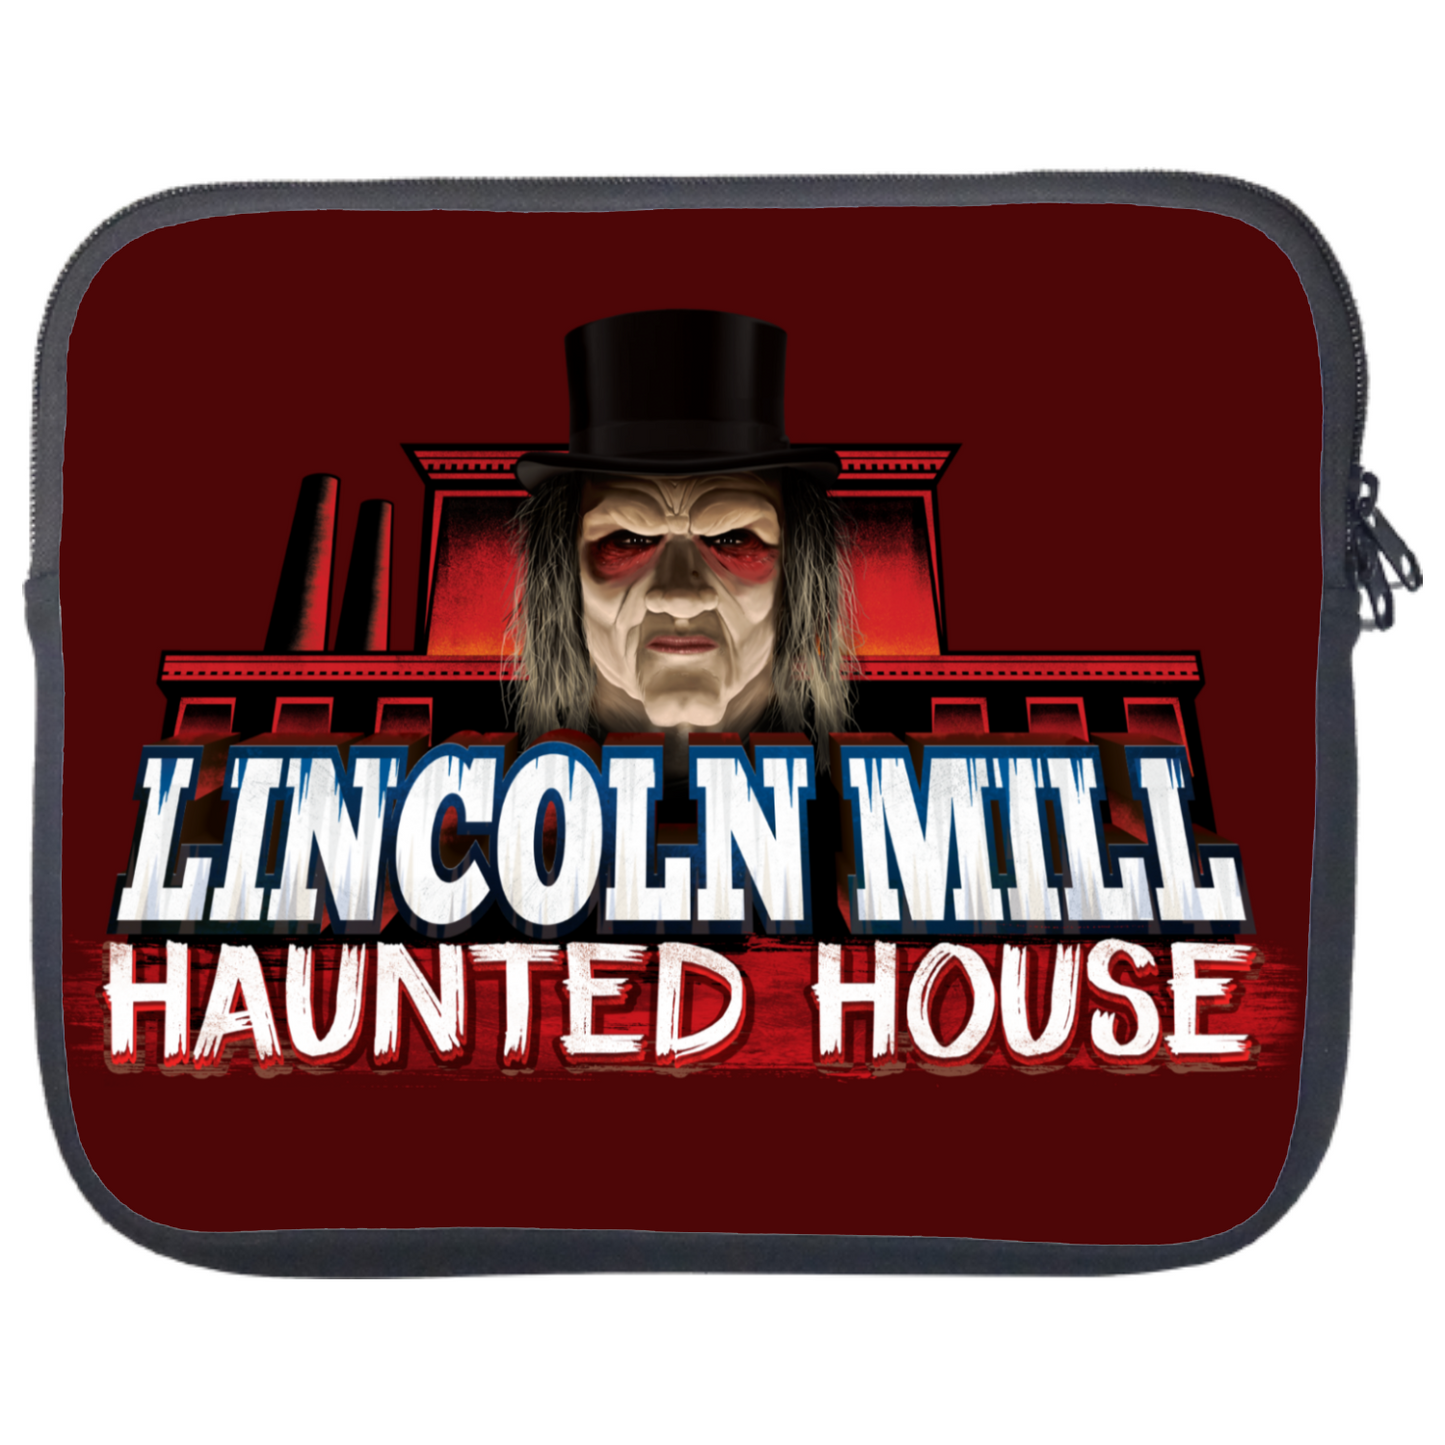 Lincoln Mill Haunted House Laptop Tablet Sleeve Case